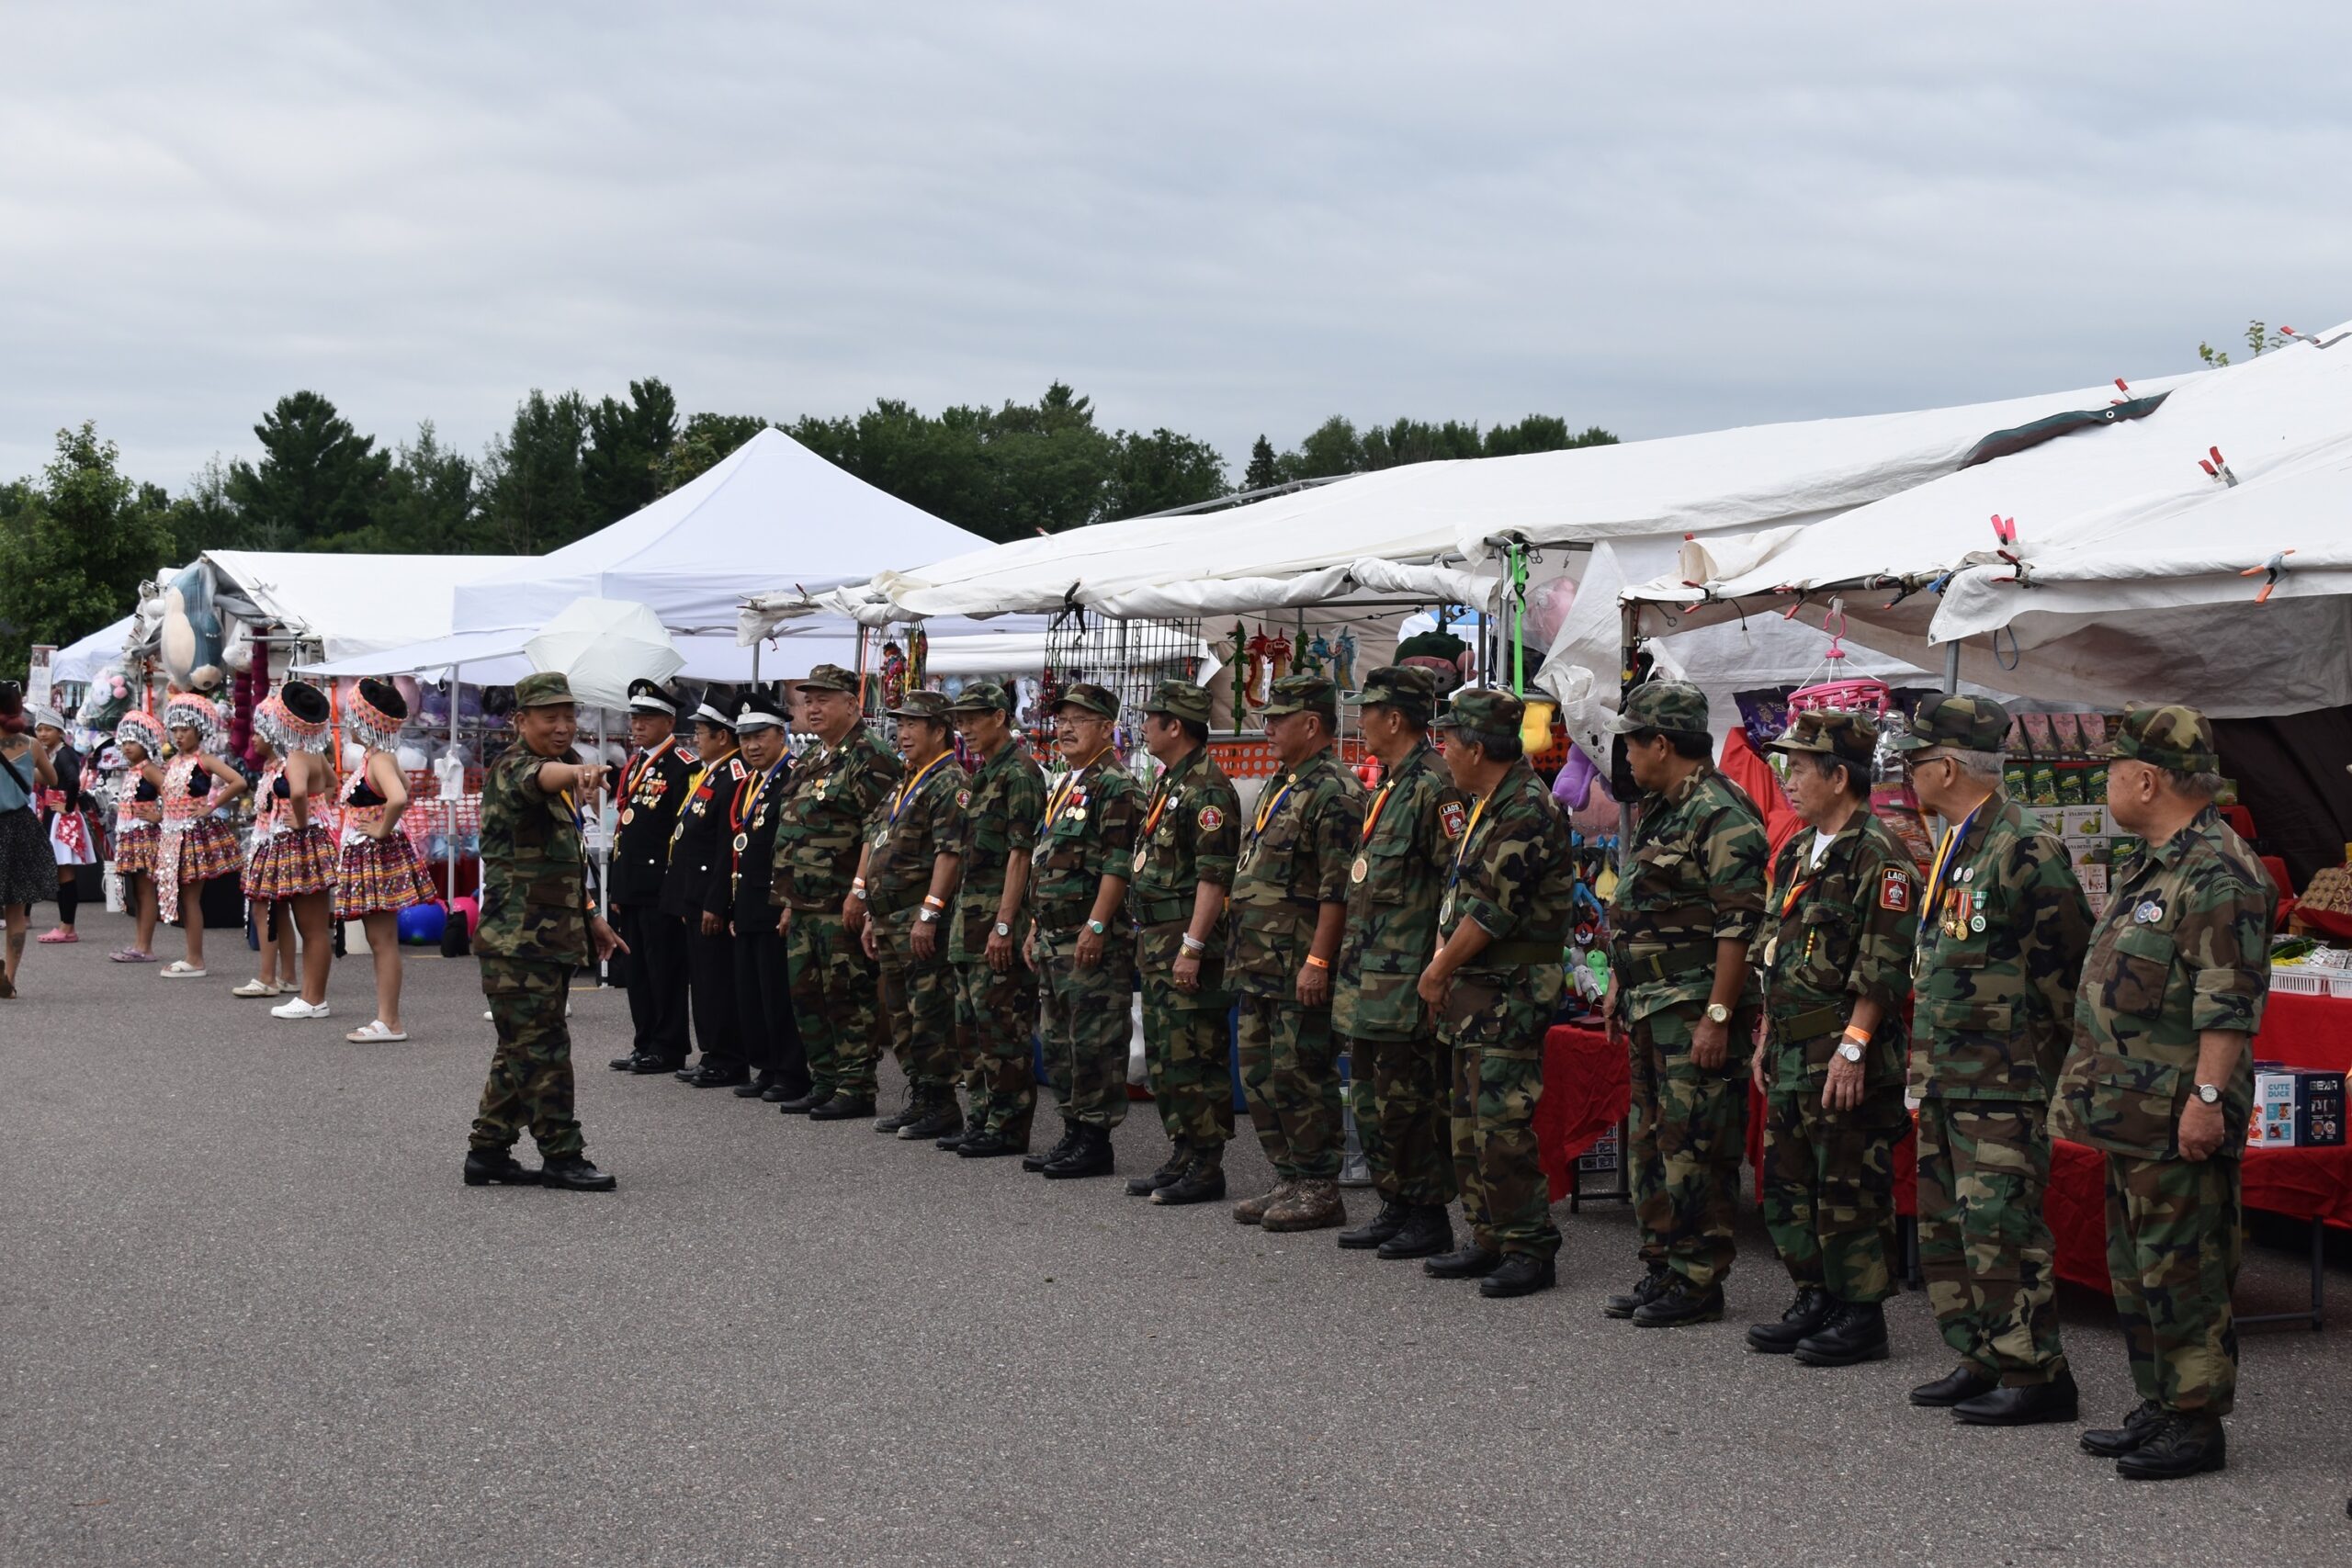 Hmong veterans of the Vietnam War, who fought alongside American troops, were part of the opening ceremonies for the Hmong Wausau Festival. Rob Mentzer